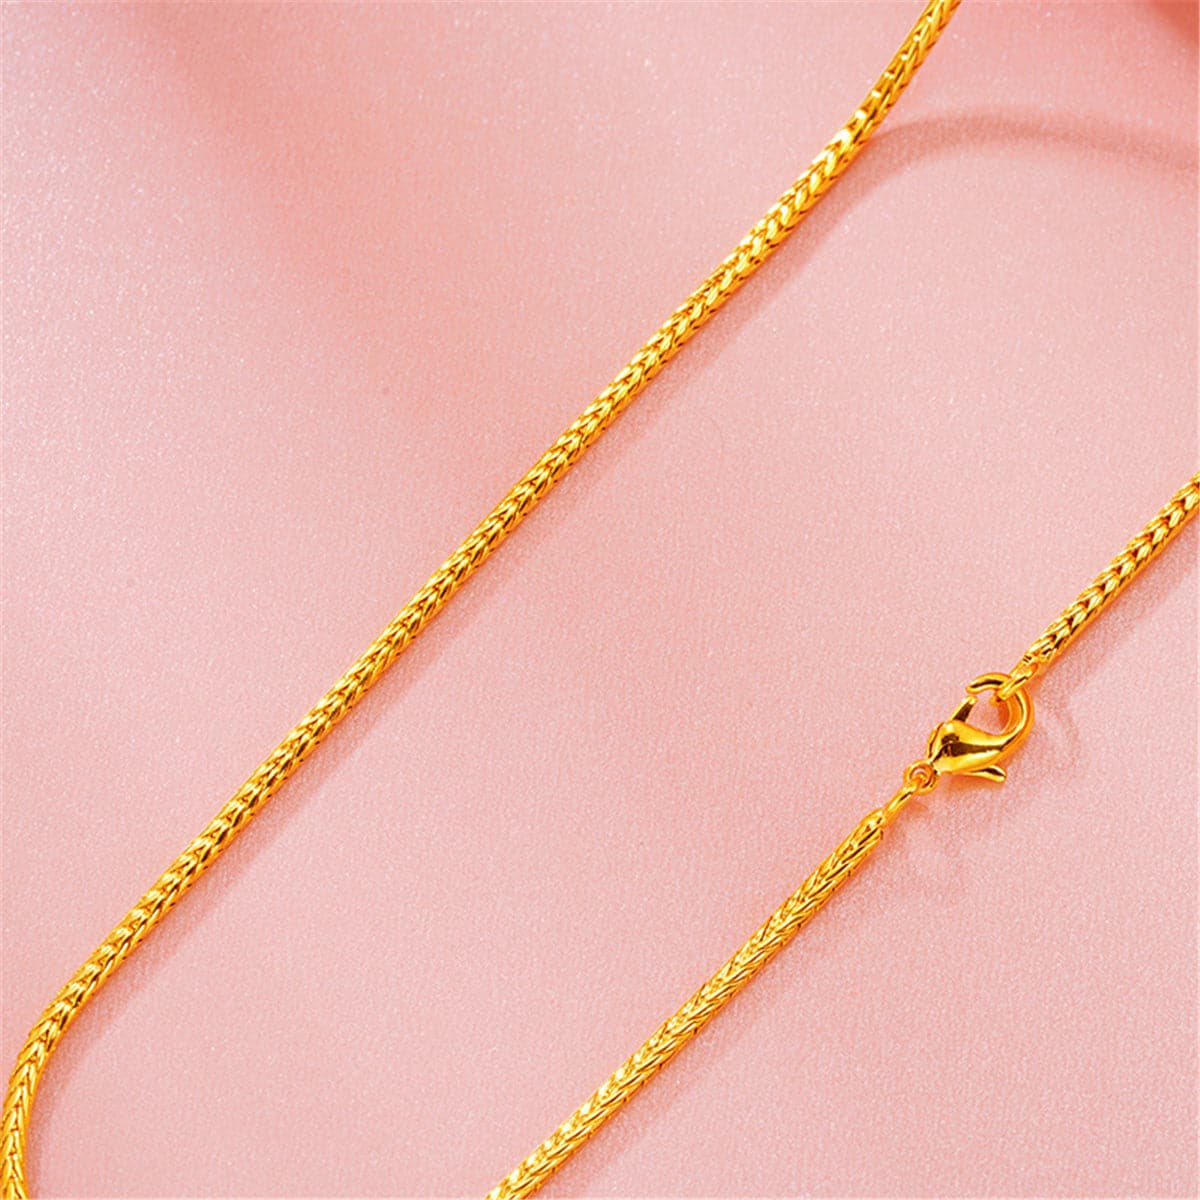 24K Gold-Plated Snake Chain Necklace